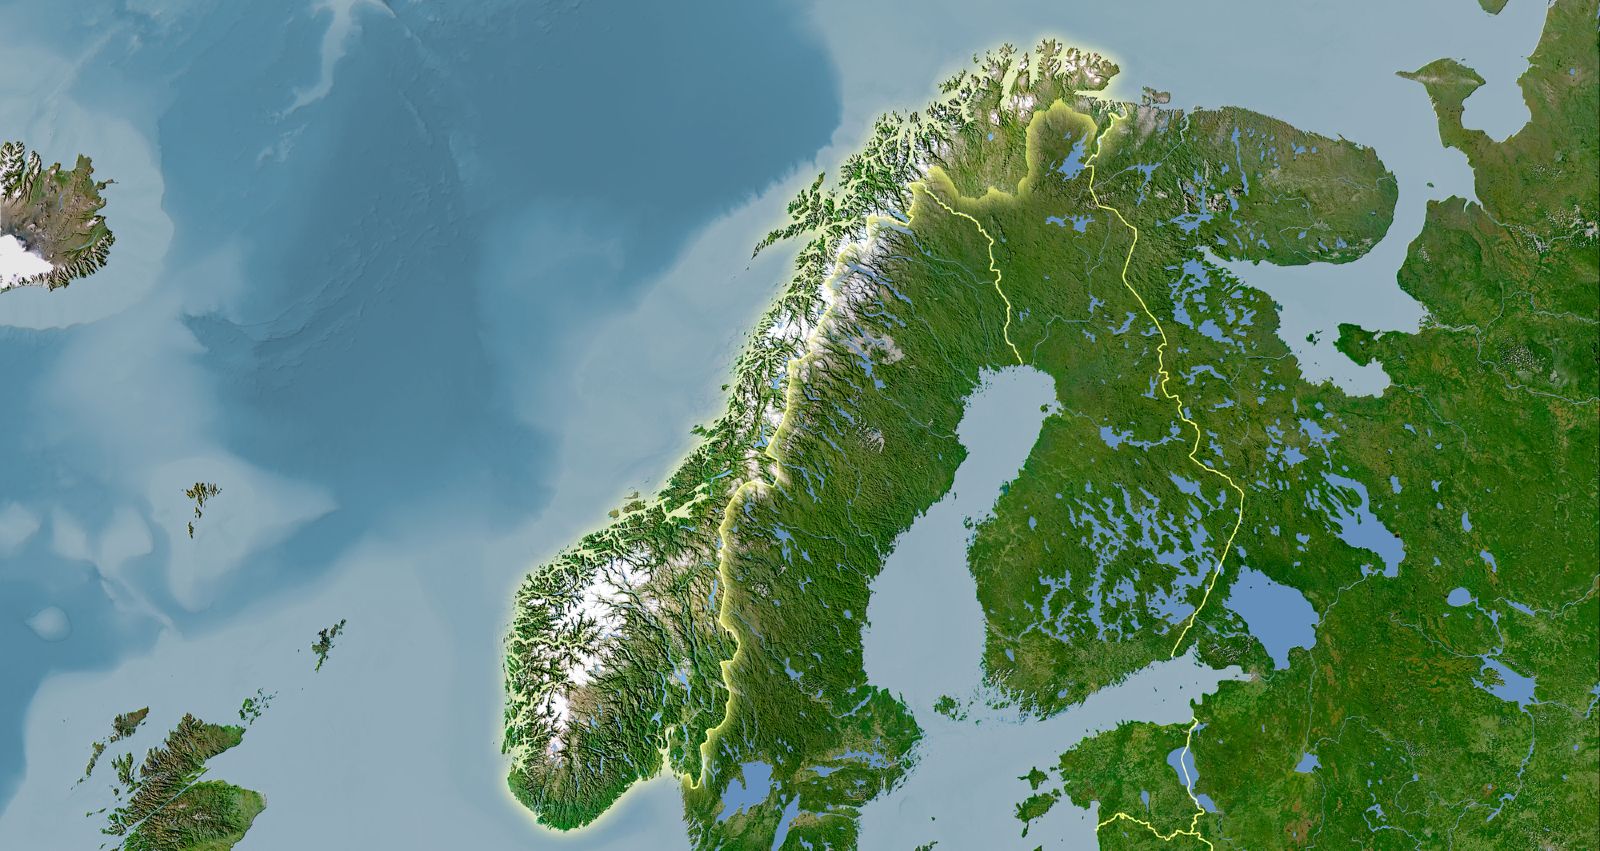 Map illustration of Norway